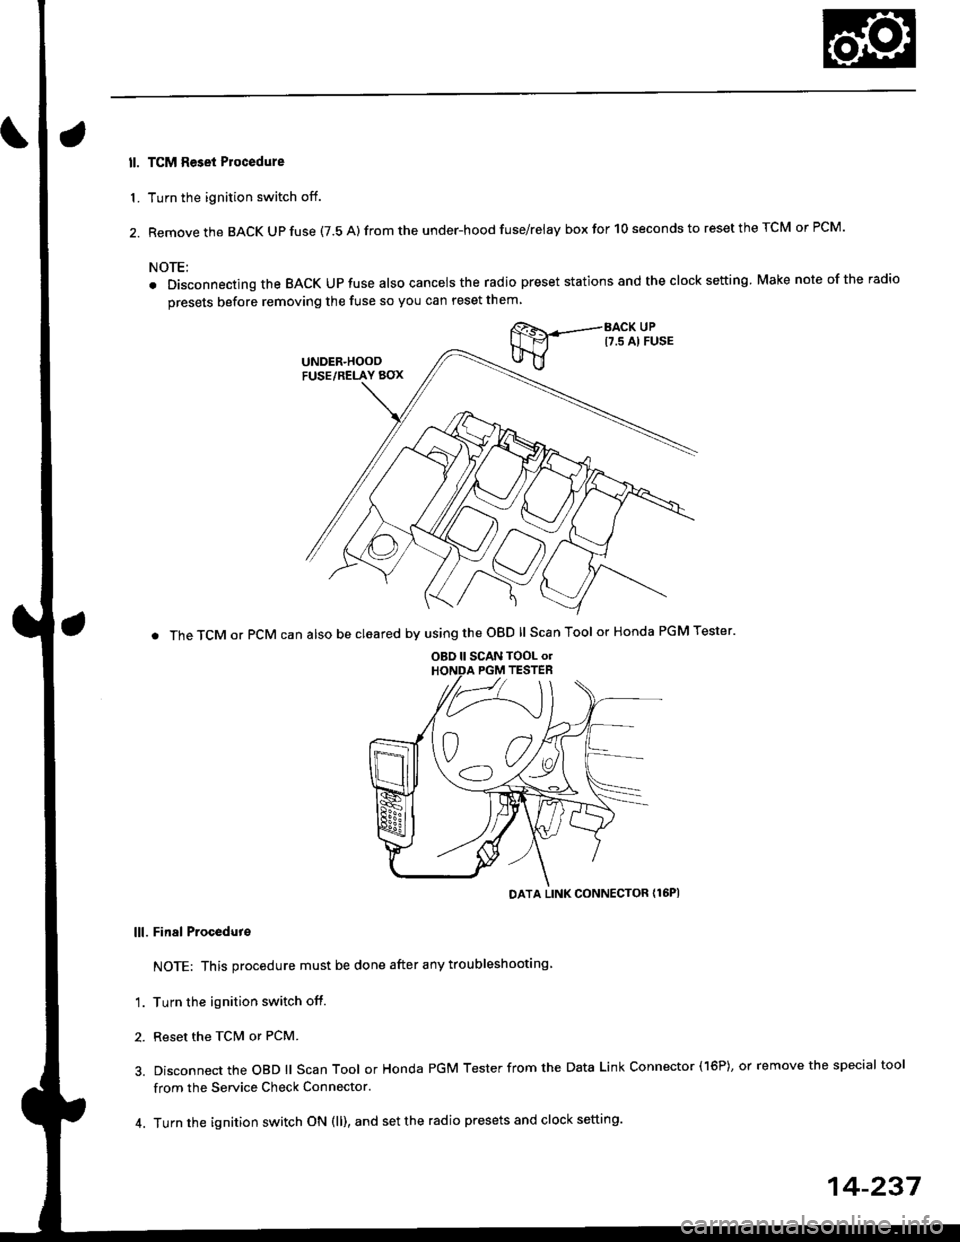 HONDA CIVIC 2000 6.G Owners Guide ll. TCM Reset Plocedure
1. Turn the ignition switch off.
2. Remove the BACK Up fuse (7.5 A) from the under-hood fuse/relay box for 10 seconds to reset the TCM or PCM.
NOTE:
. Disconnecting the BACK UP